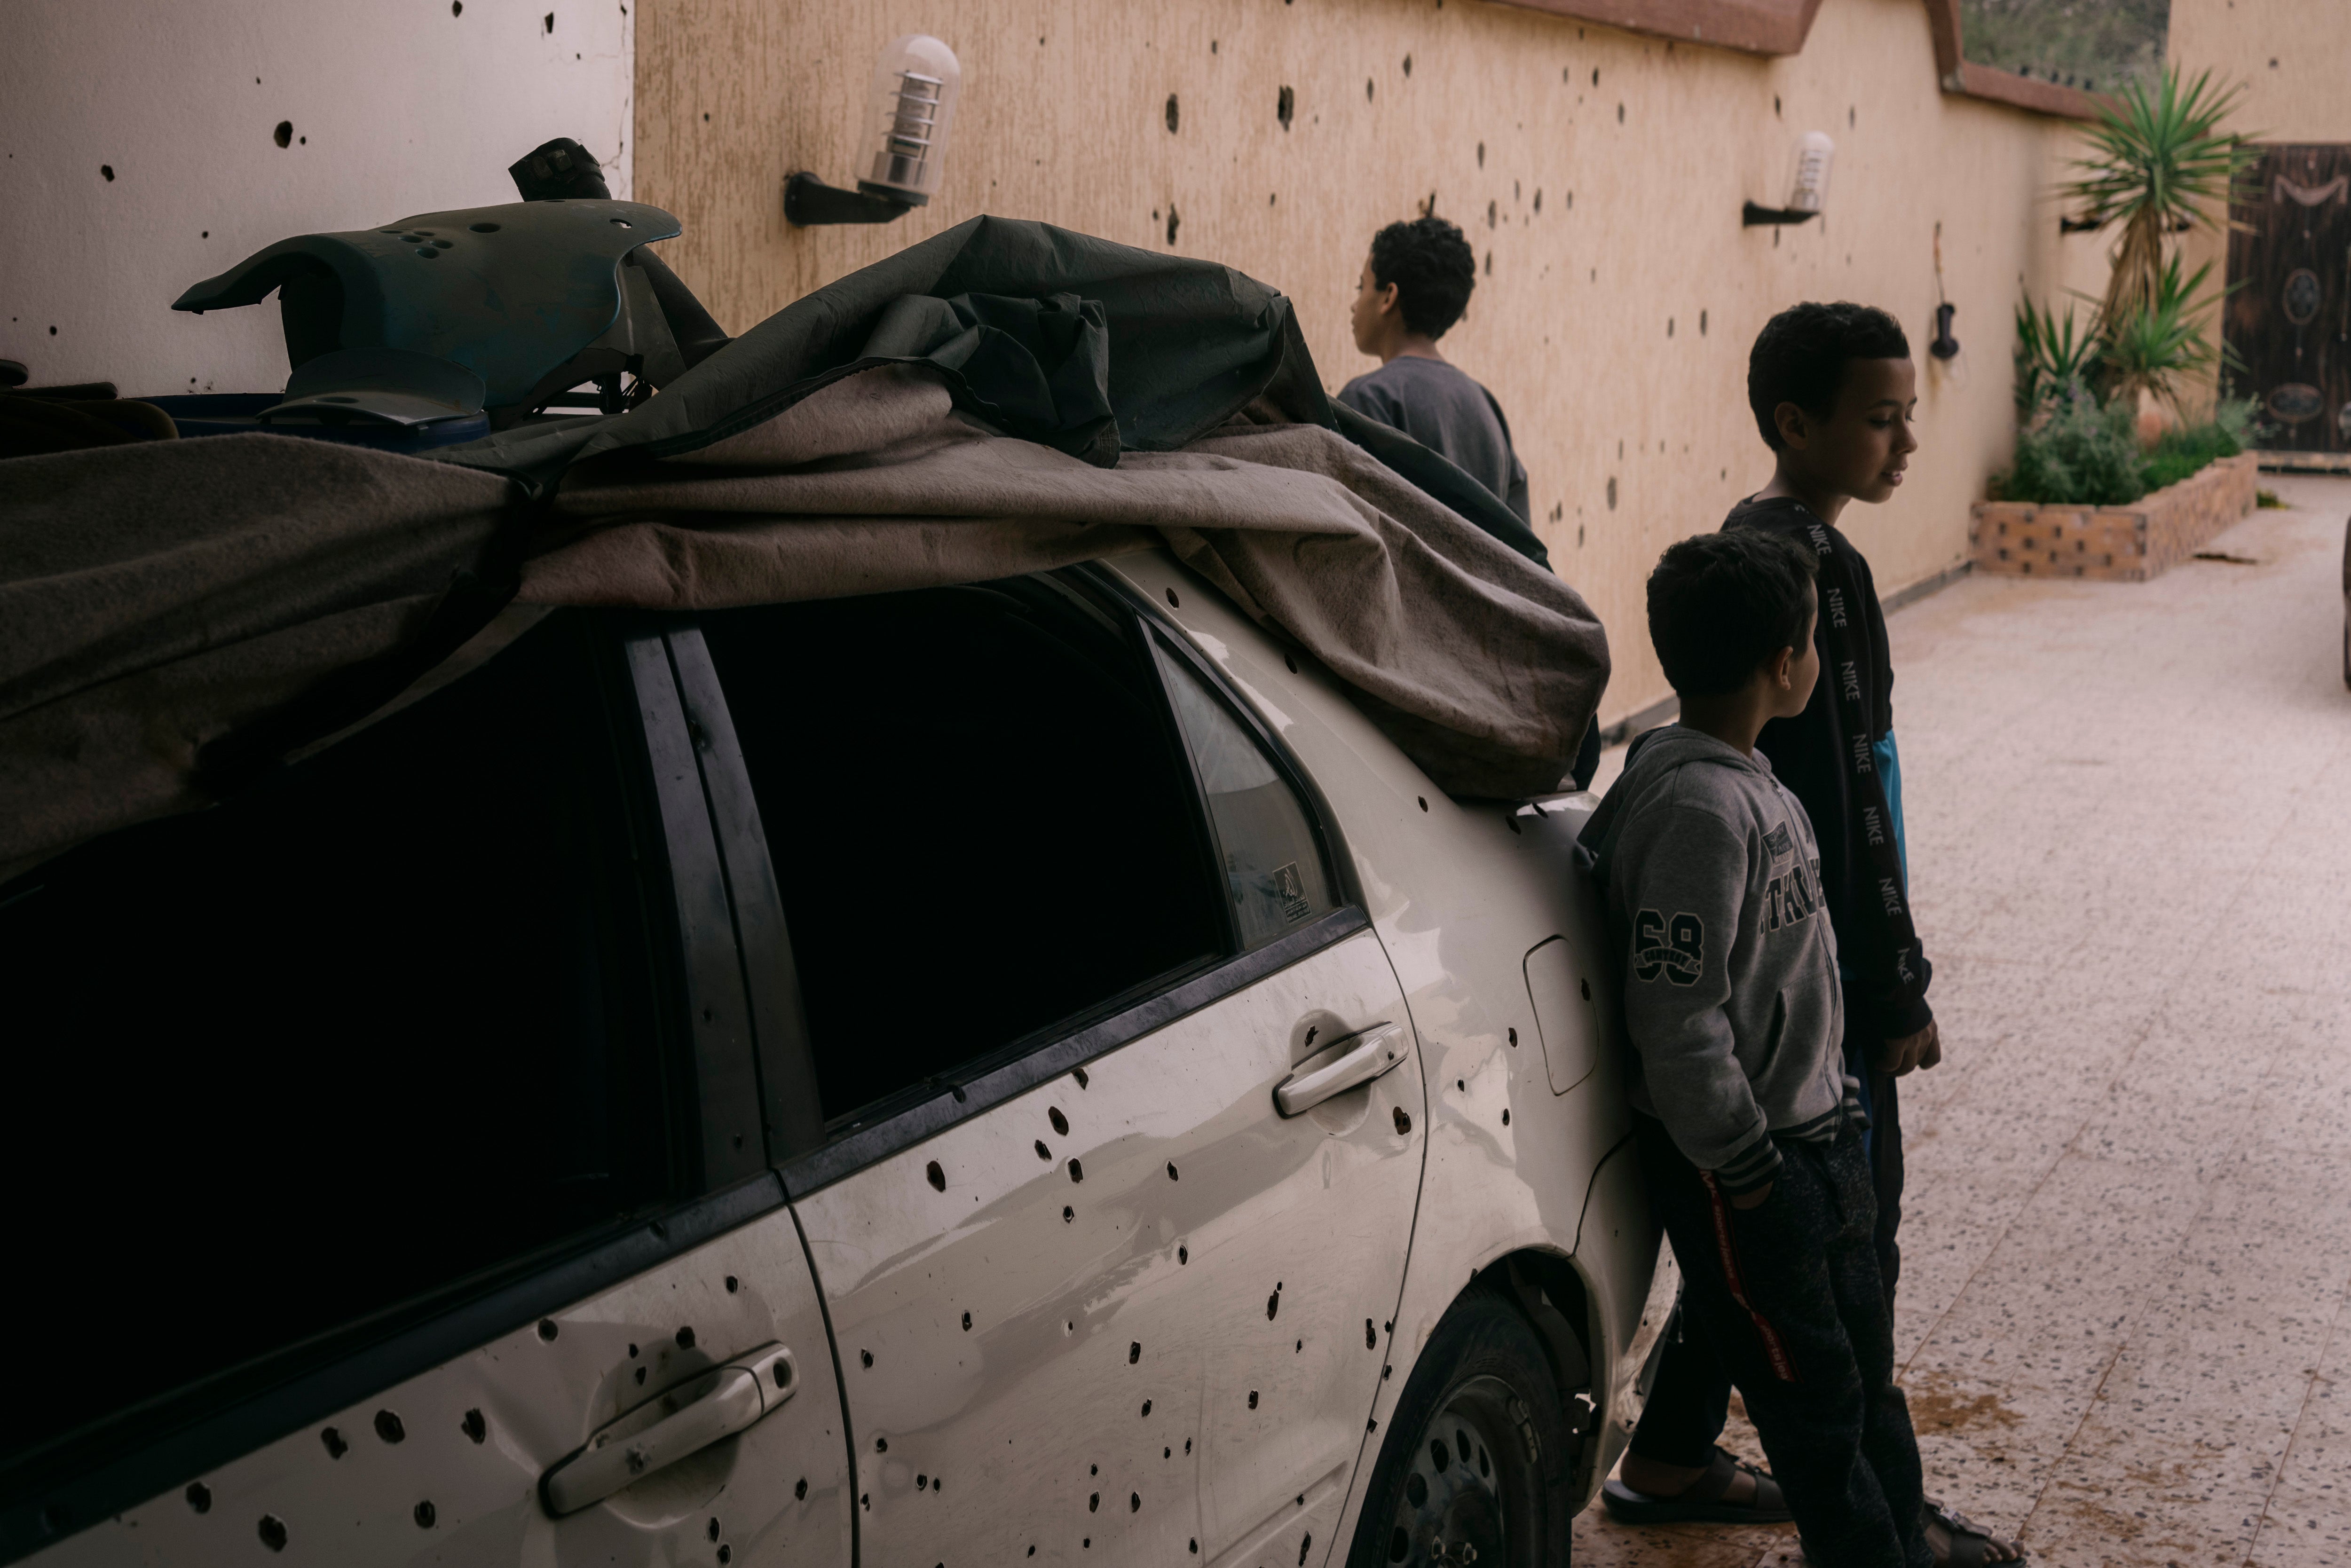 Abdul Rahman al-Ghobaily’s children pictured outside their home. Al-Ghobaily was injured twice by booby traps left behind on the family’s property